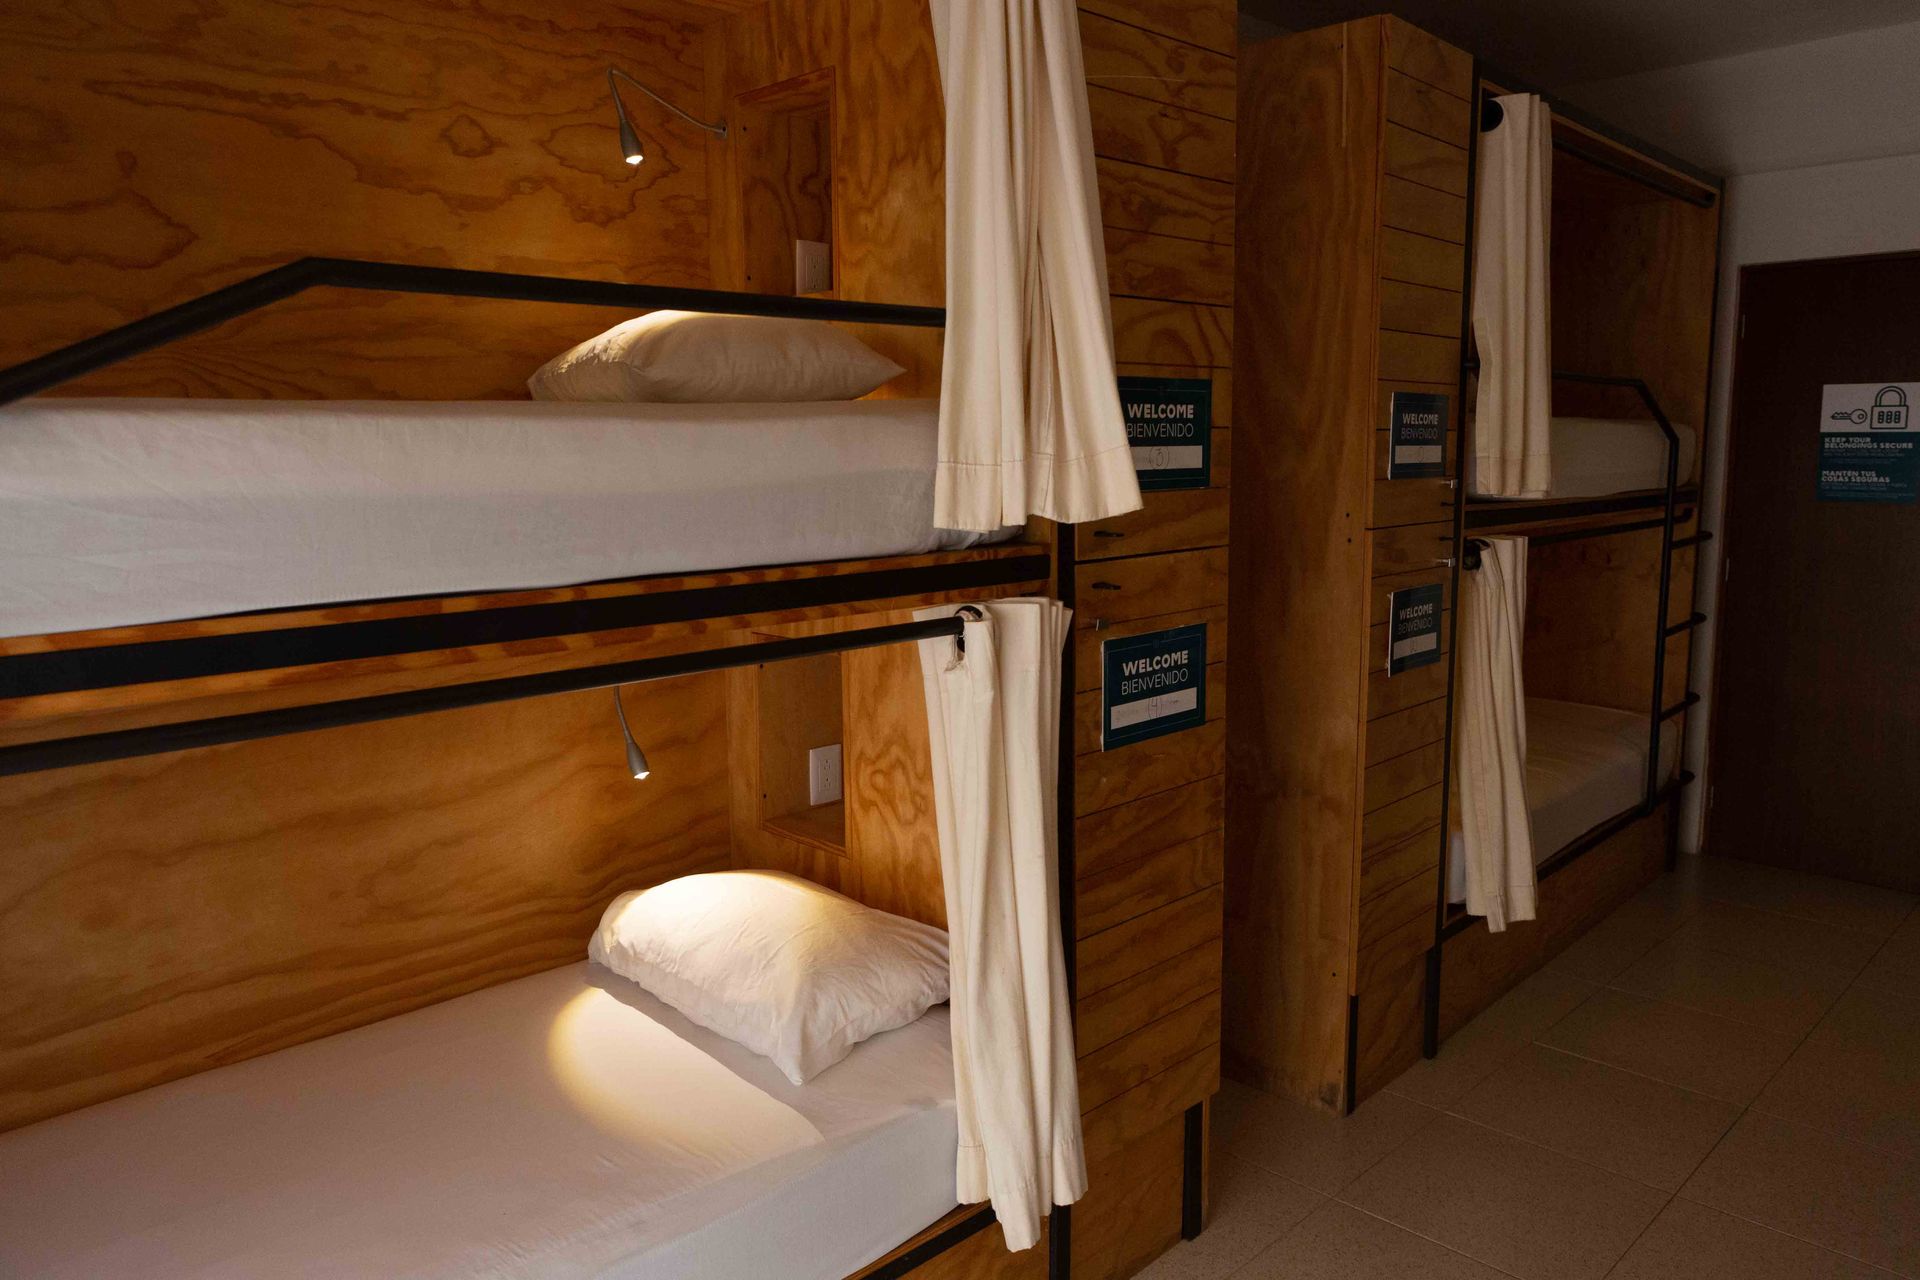 A row of bunk beds in a room with wooden walls.